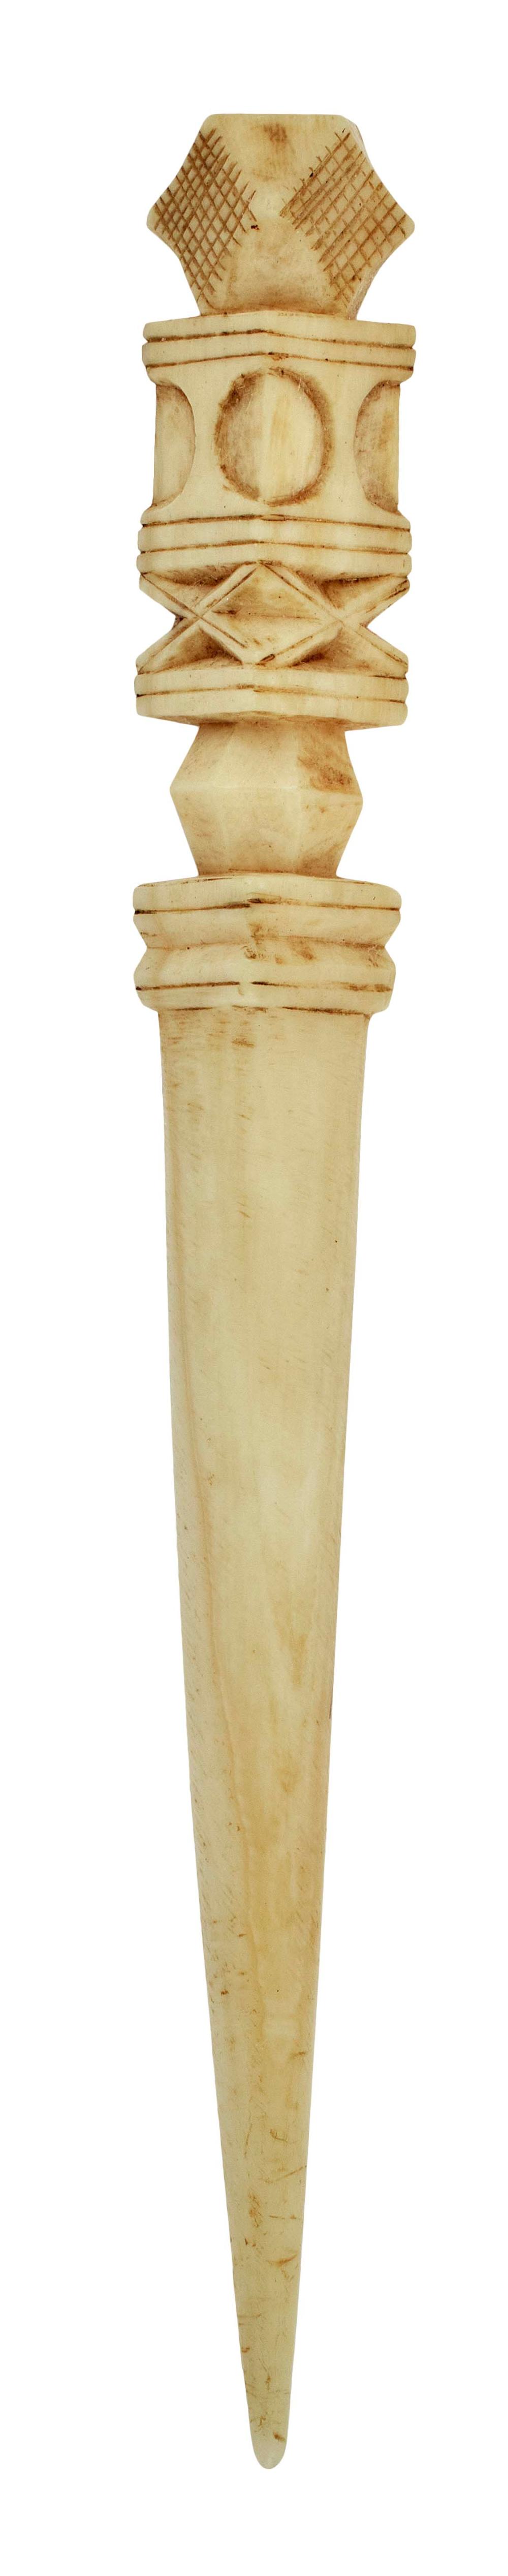 WHALE IVORY BODKIN WITH ARCHITECTURAL 2f1235